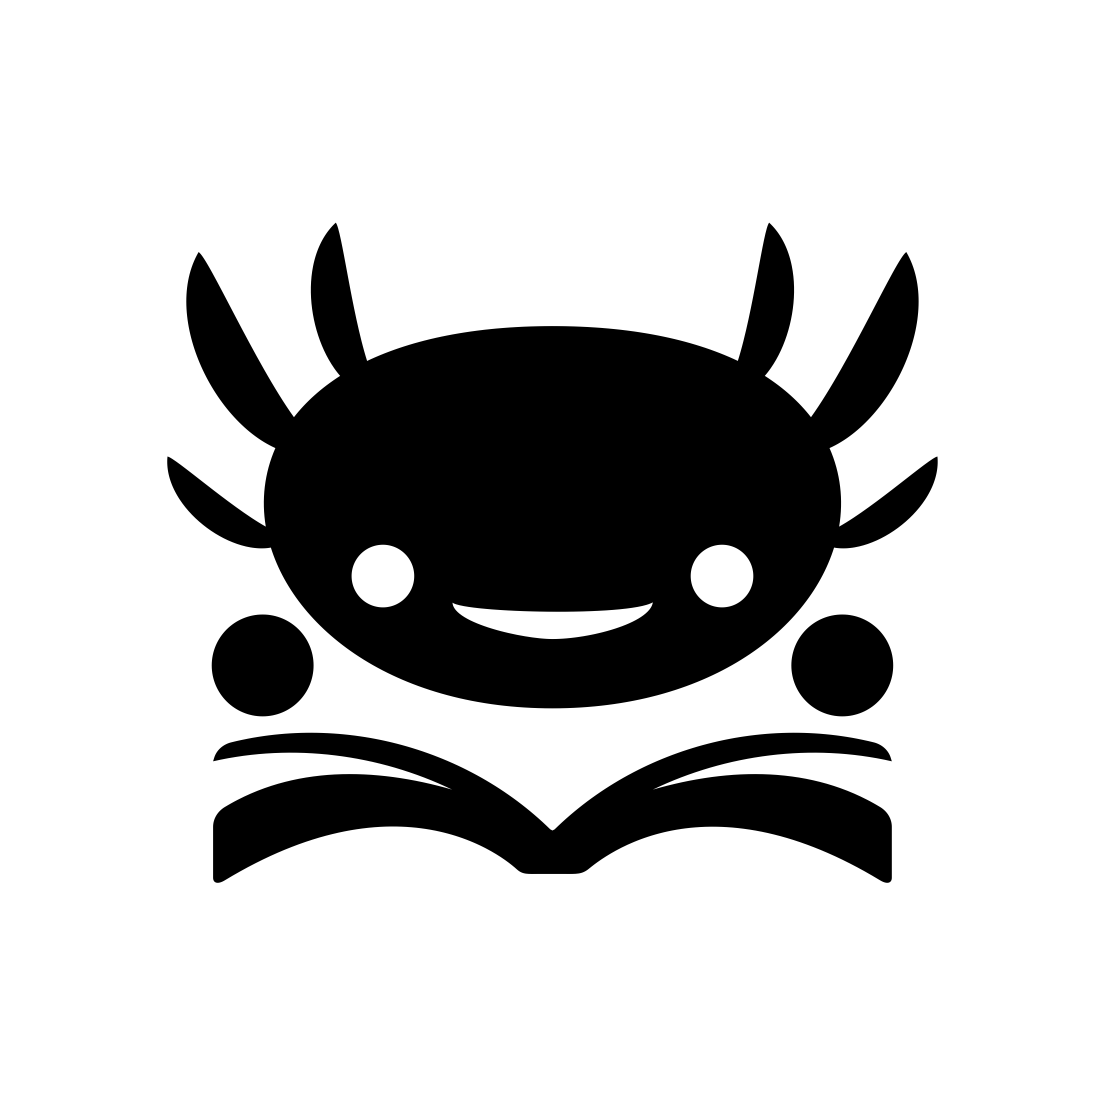 Axolotl Logo logo design by logo designer Karl McCarthy Design for your inspiration and for the worlds largest logo competition